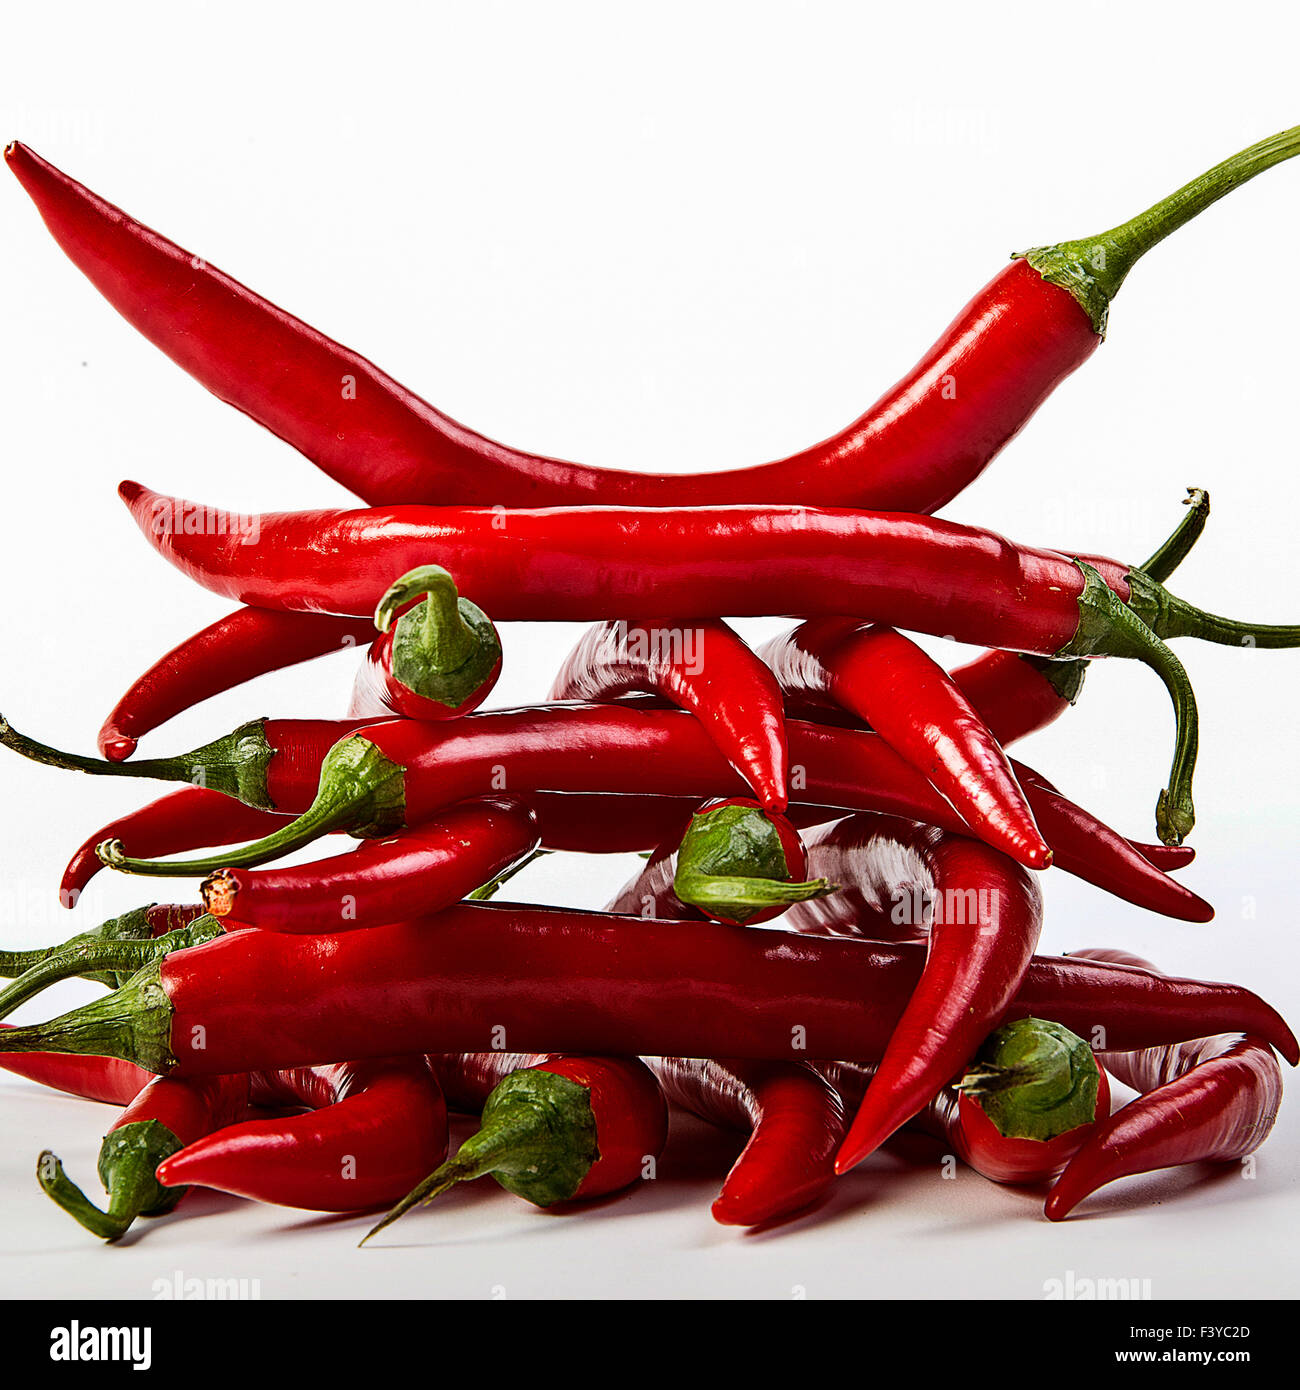 paprika peppers Stock Photo